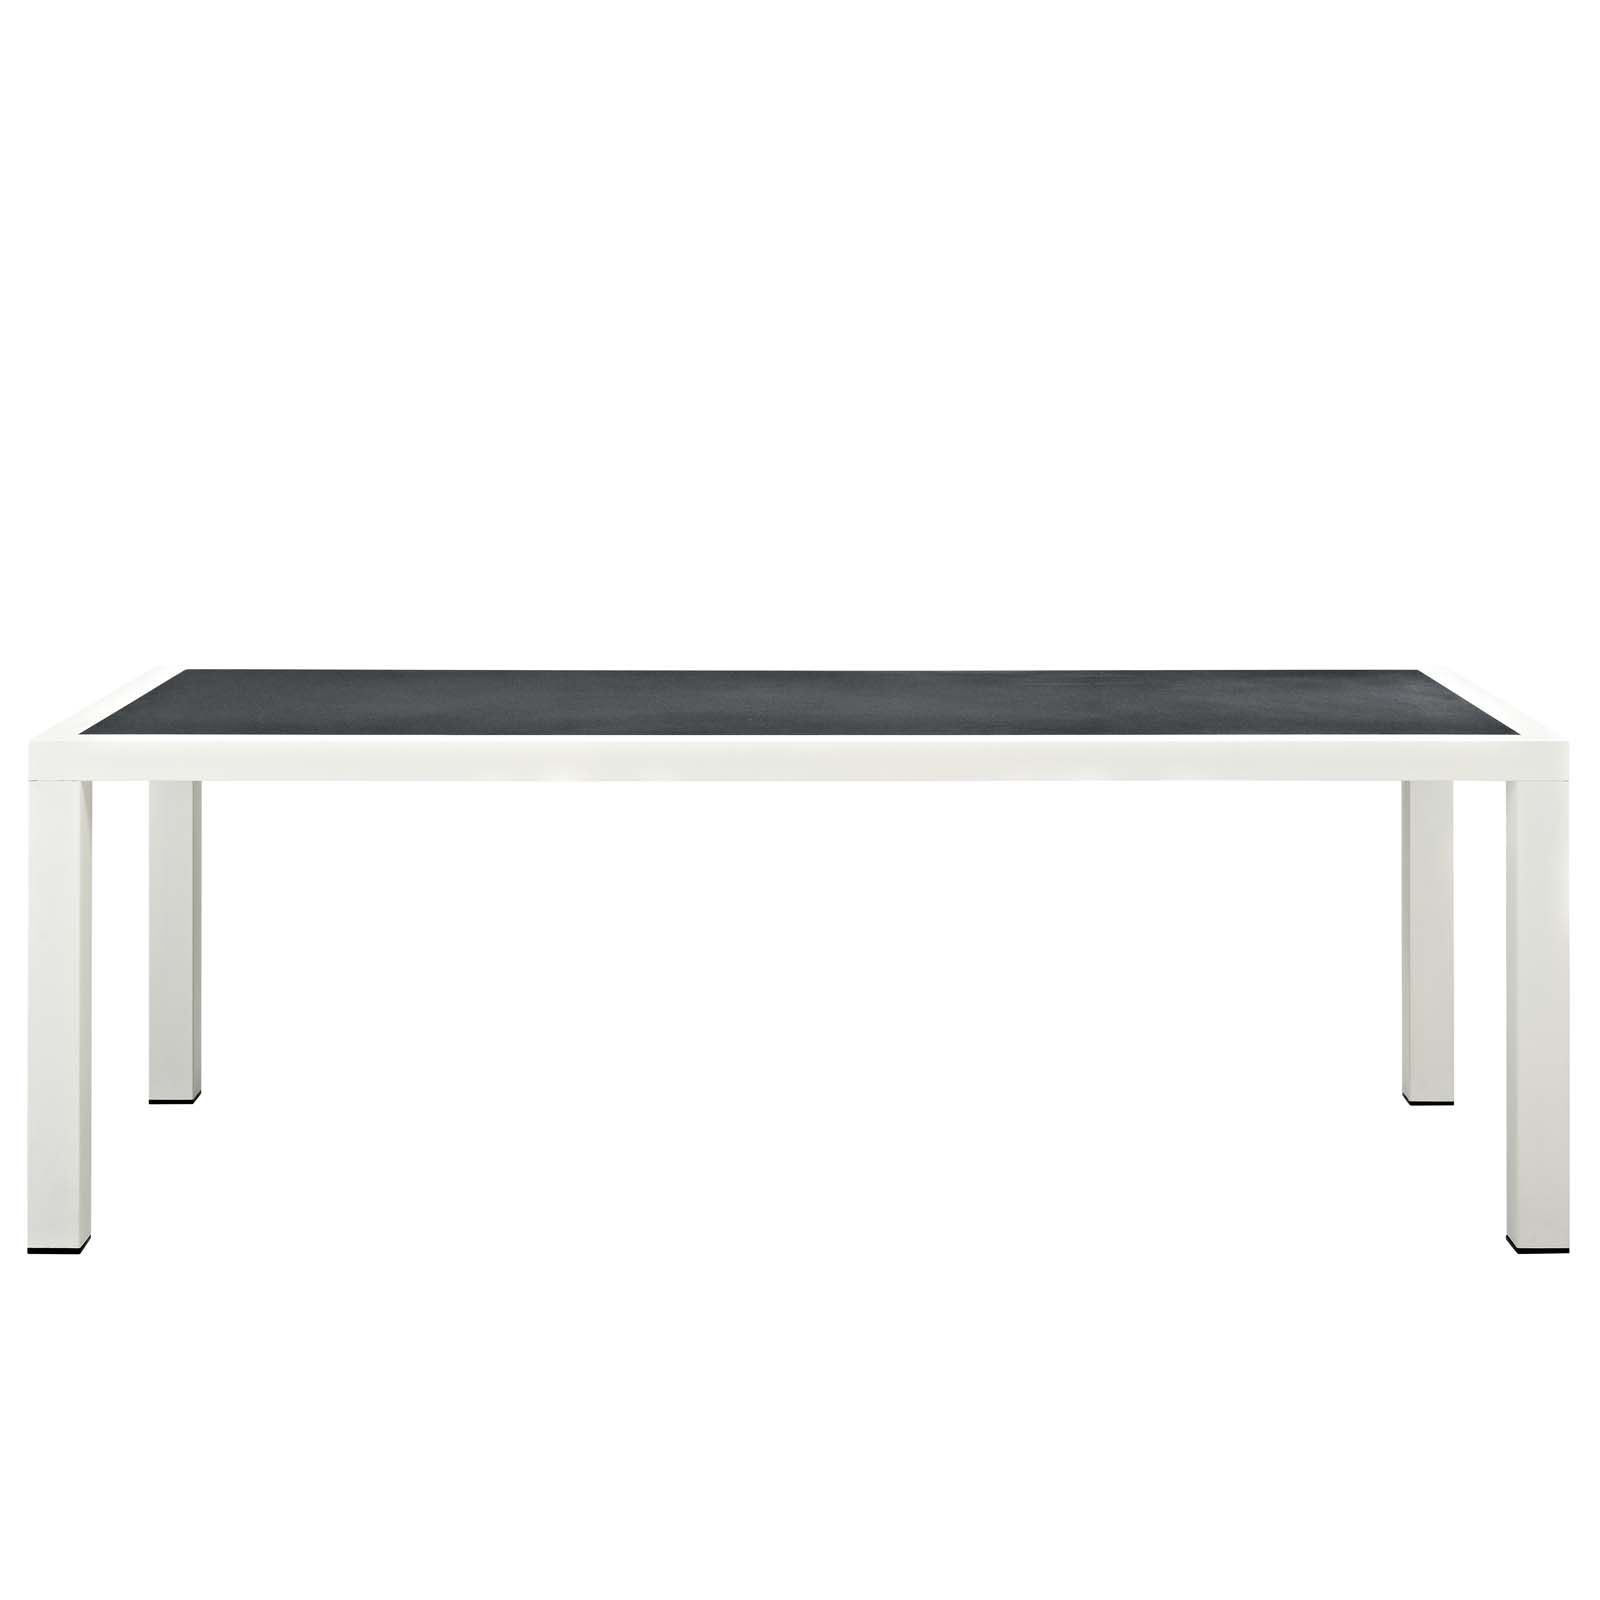 Modway Stance 90.5" Outdoor Patio Aluminum Dining Table in White Gray - image 3 of 6